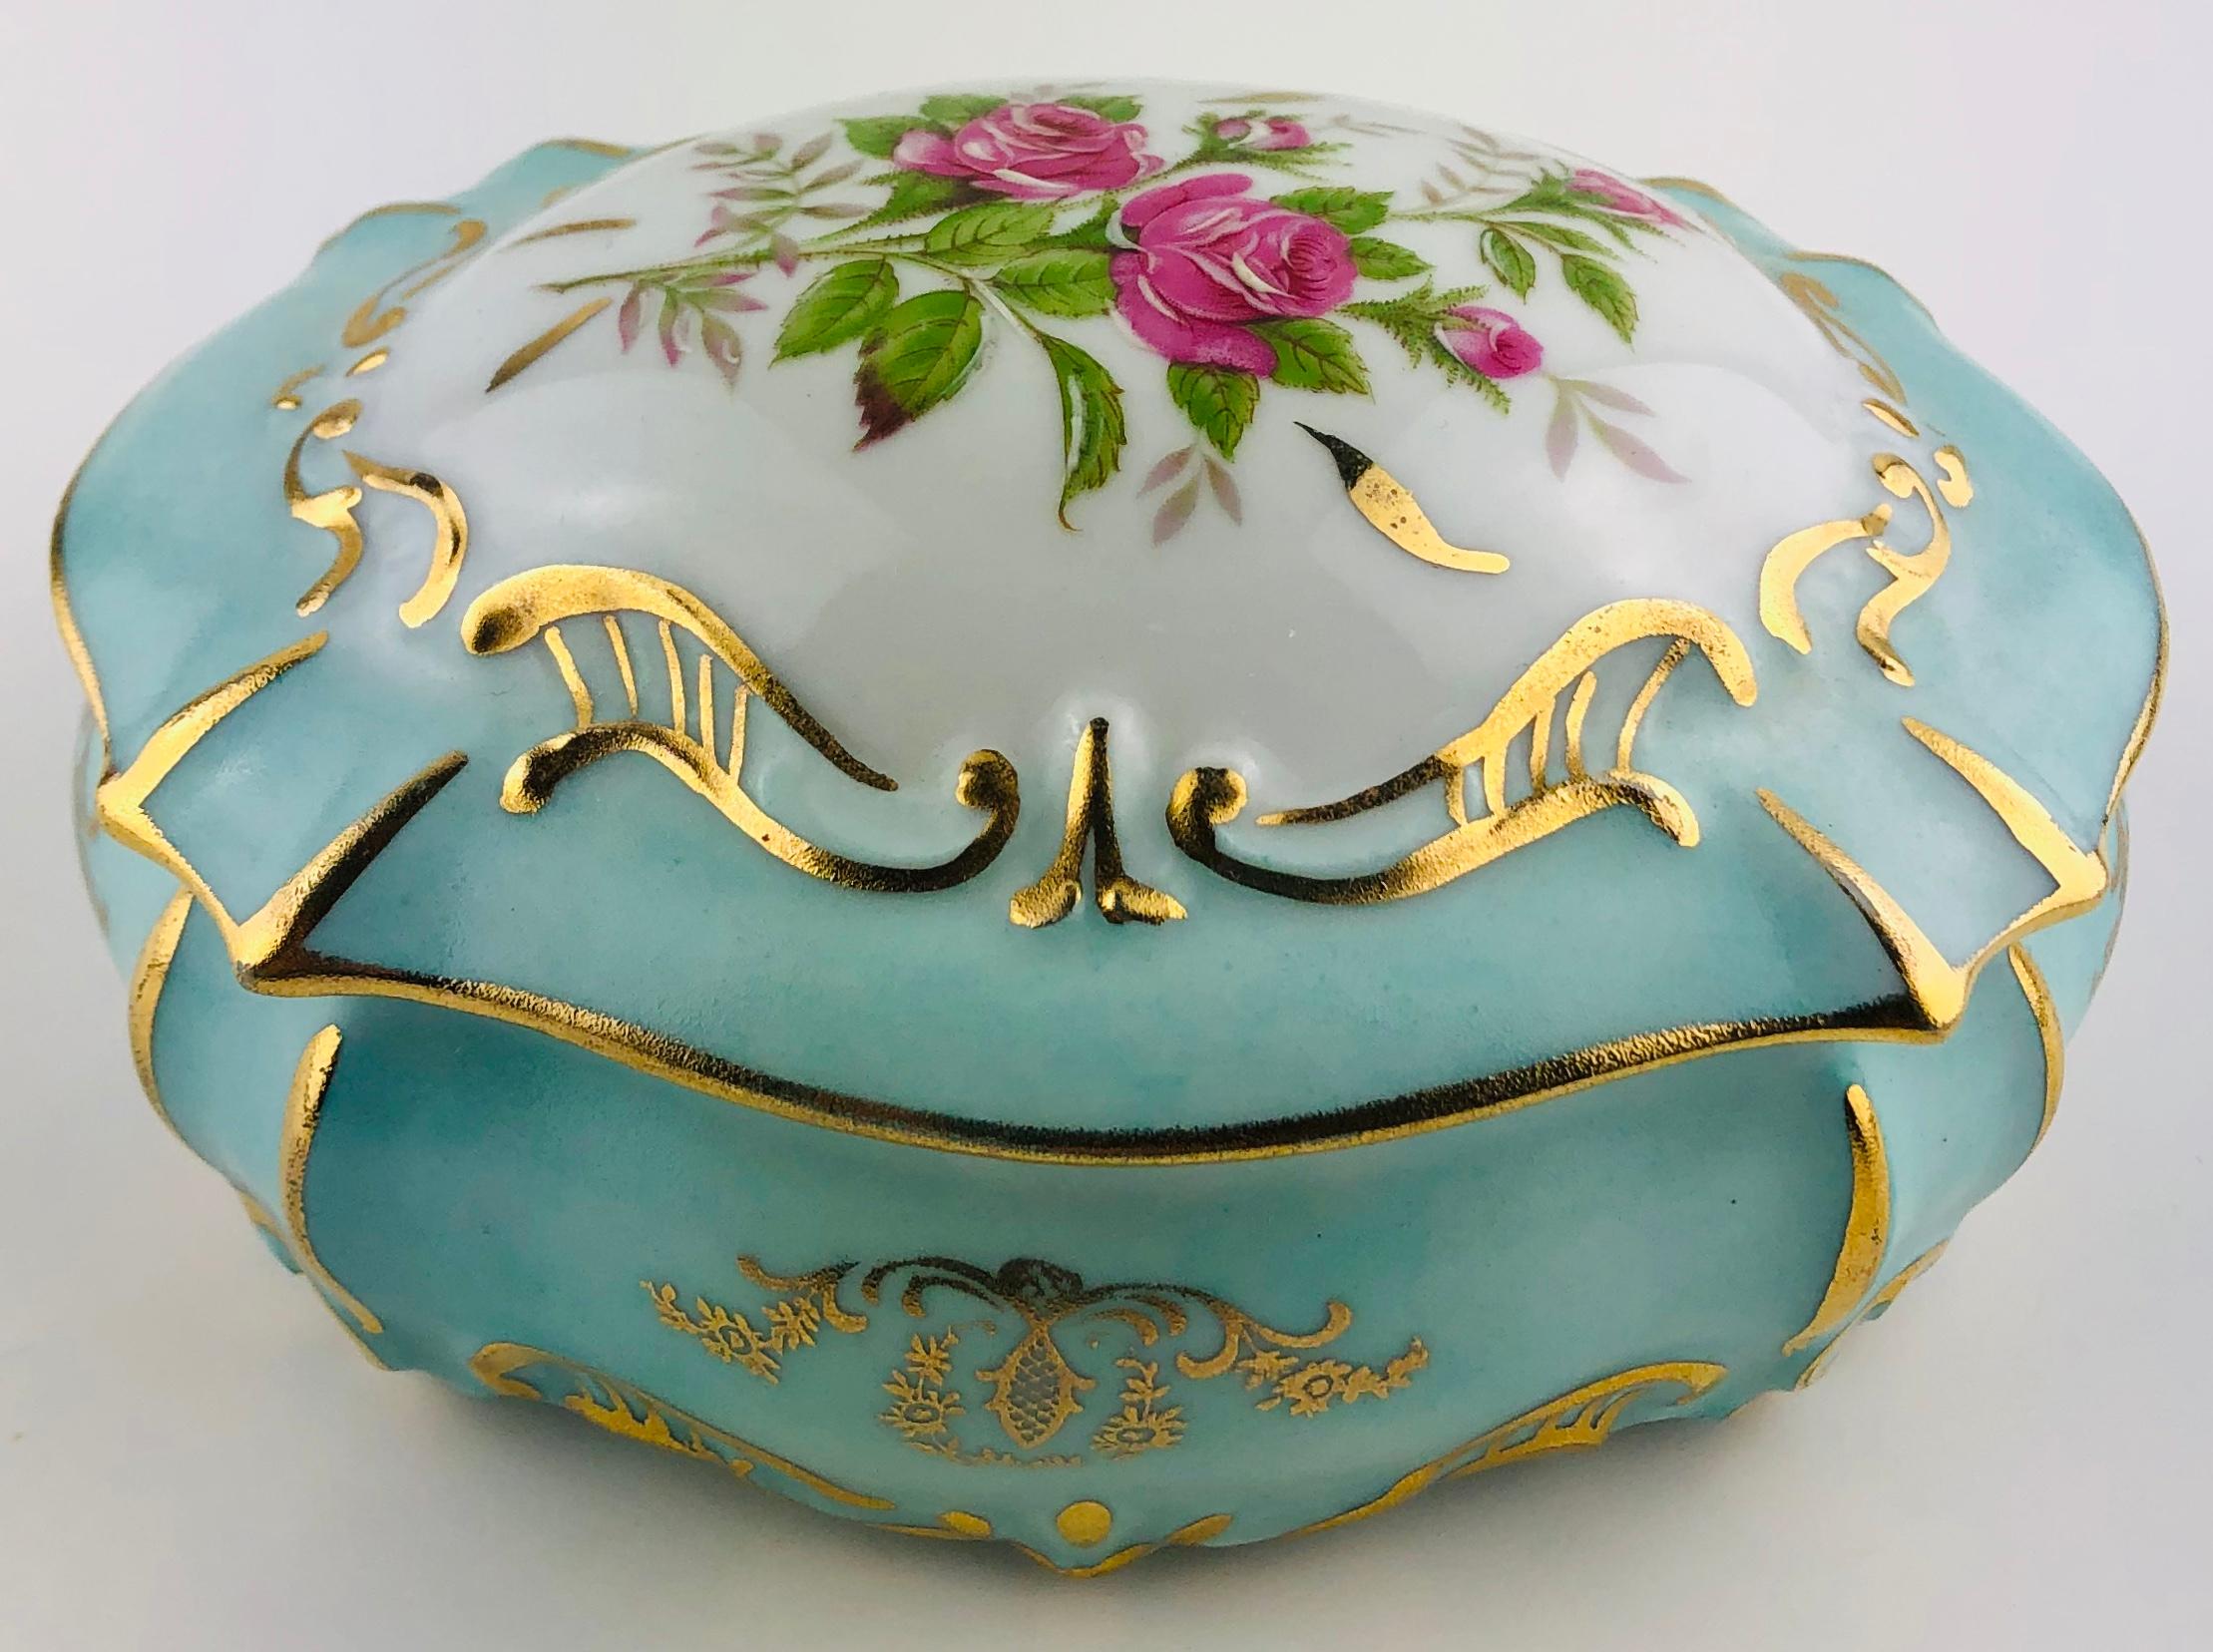 A truly exquisite French Limoges hand painted gold trimmed trinket /jewelry box or candy dish, circa 1930. 
Bears the Limoges stamp.
Glazed.

Measures: 5 7/8